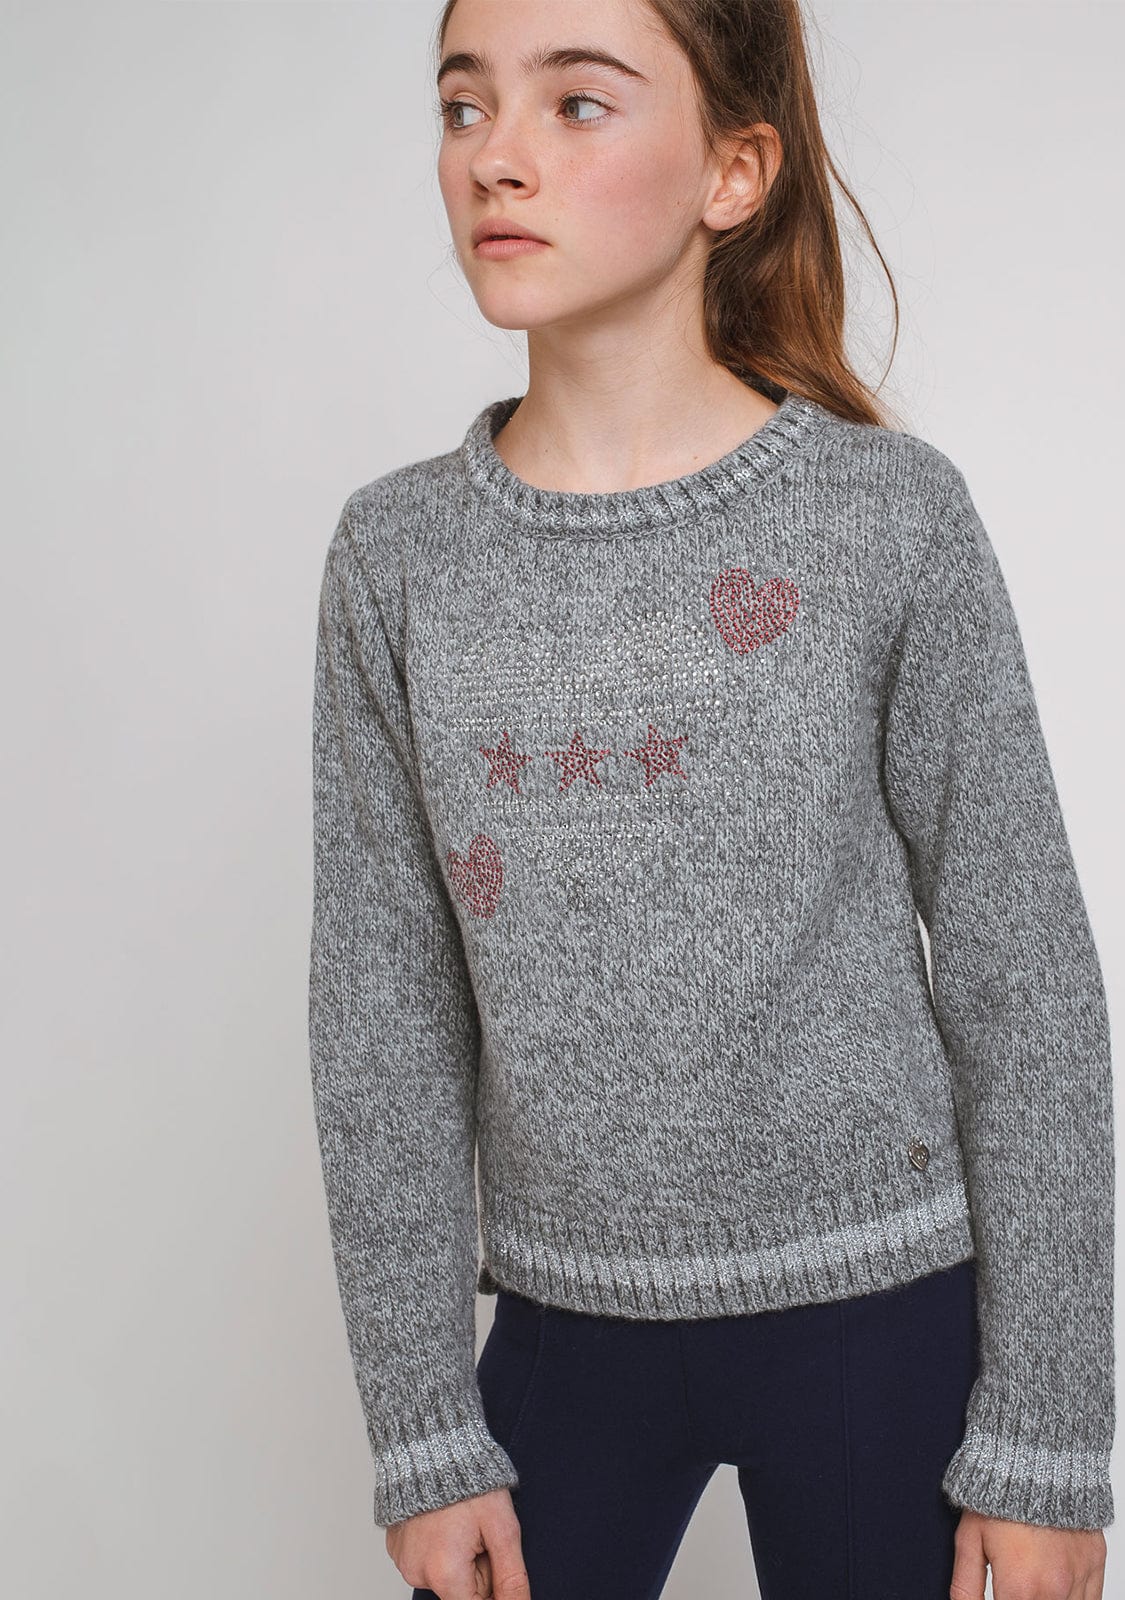 CONGUITOS TEXTIL Clothing Girl's Grey Strass Hearts Jersey